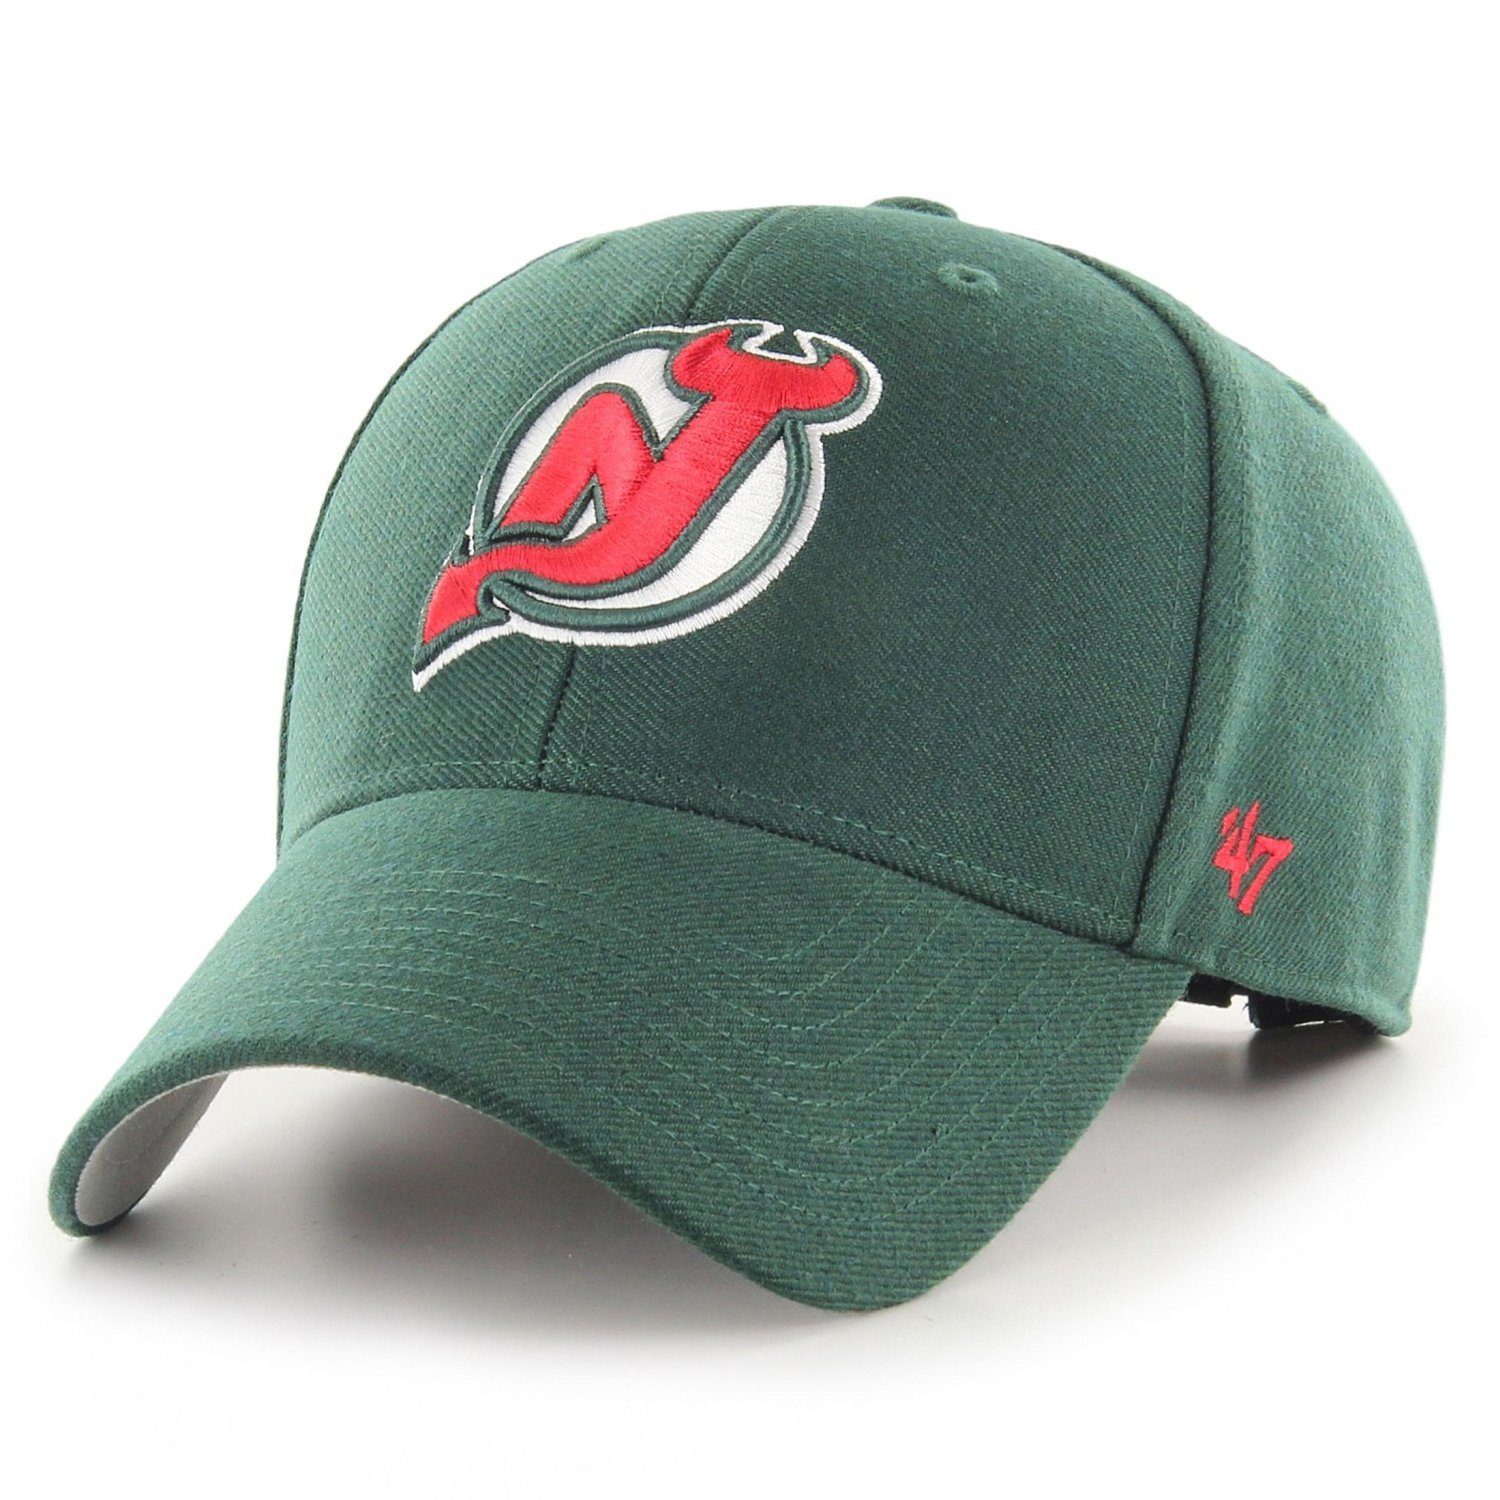 '47 Brand Trucker Cap Relaxed Fit NHL New Jersey Devils